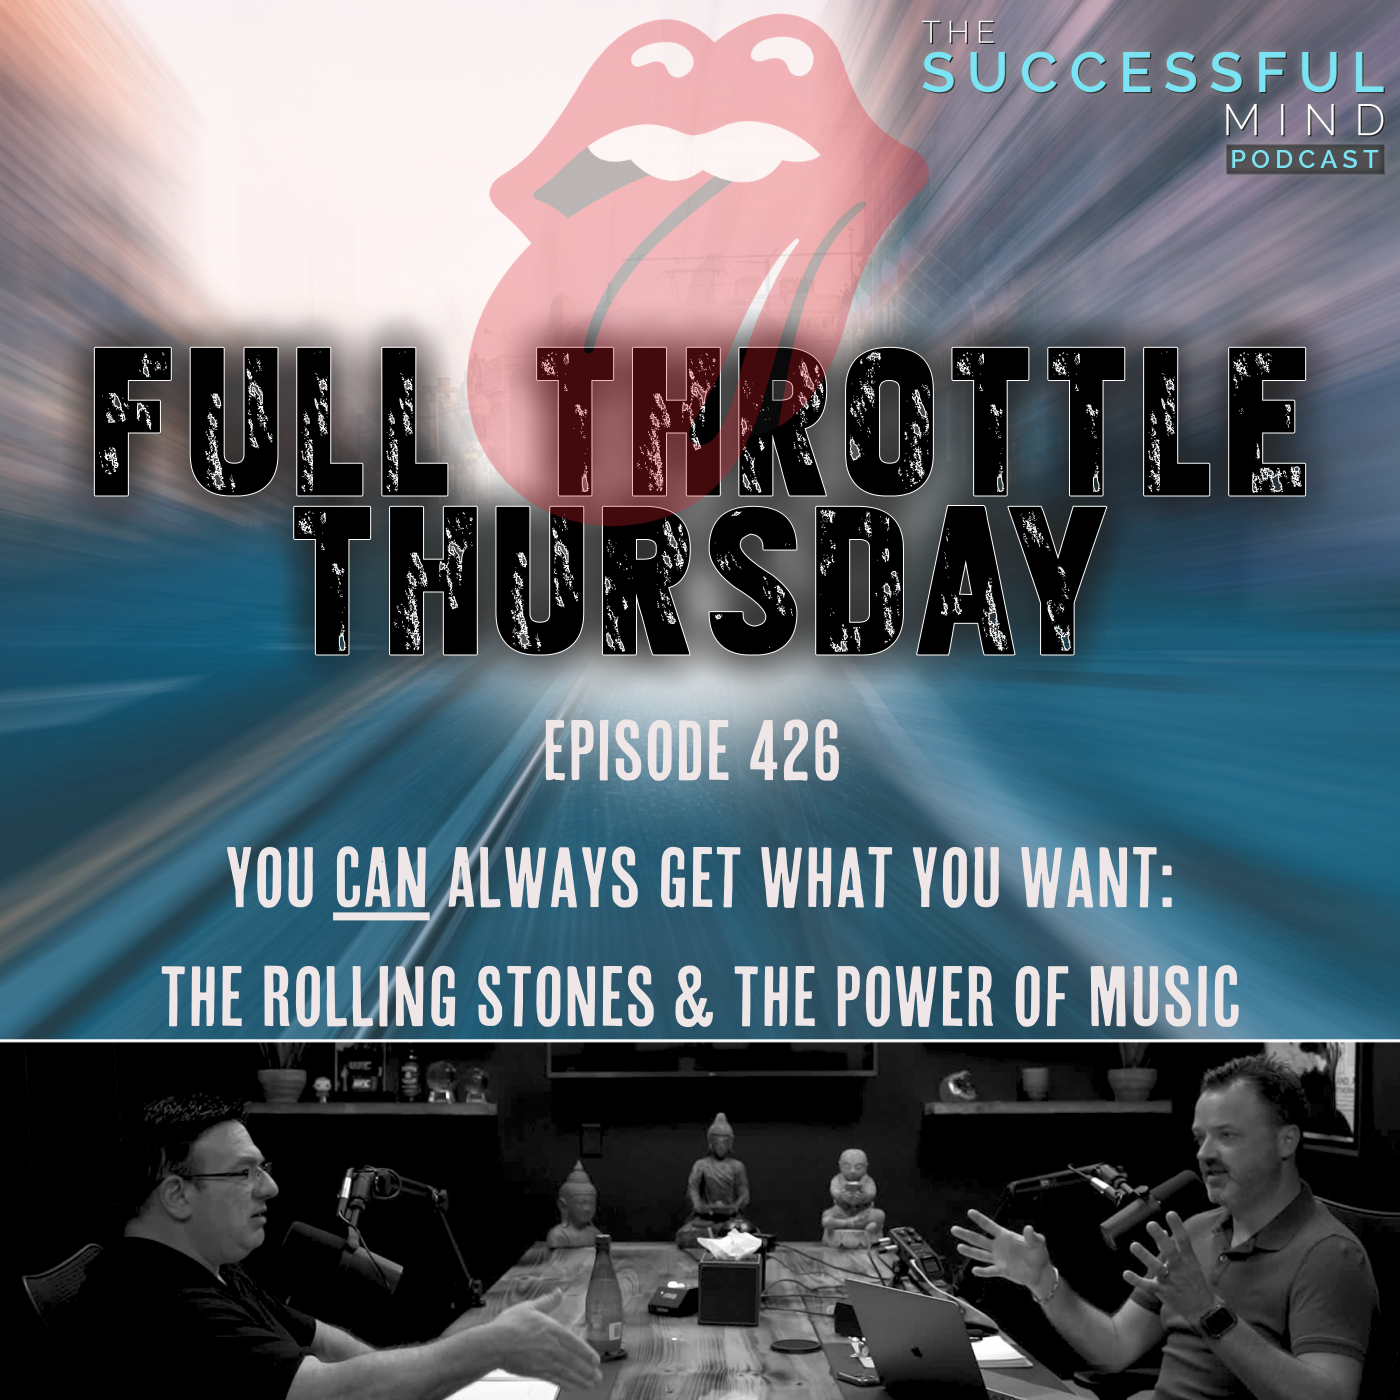 The Successful Mind Podcast - Full Throttle Thursday - The Rolling Stones & The Power of Music